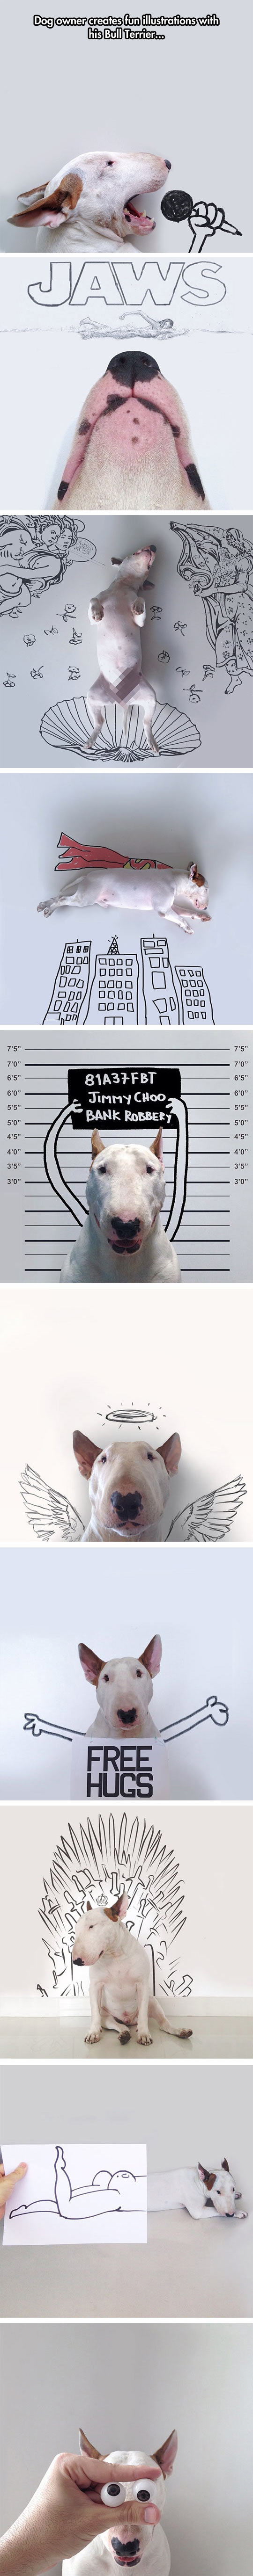 The Fascinating Life Of A Bull Terrier